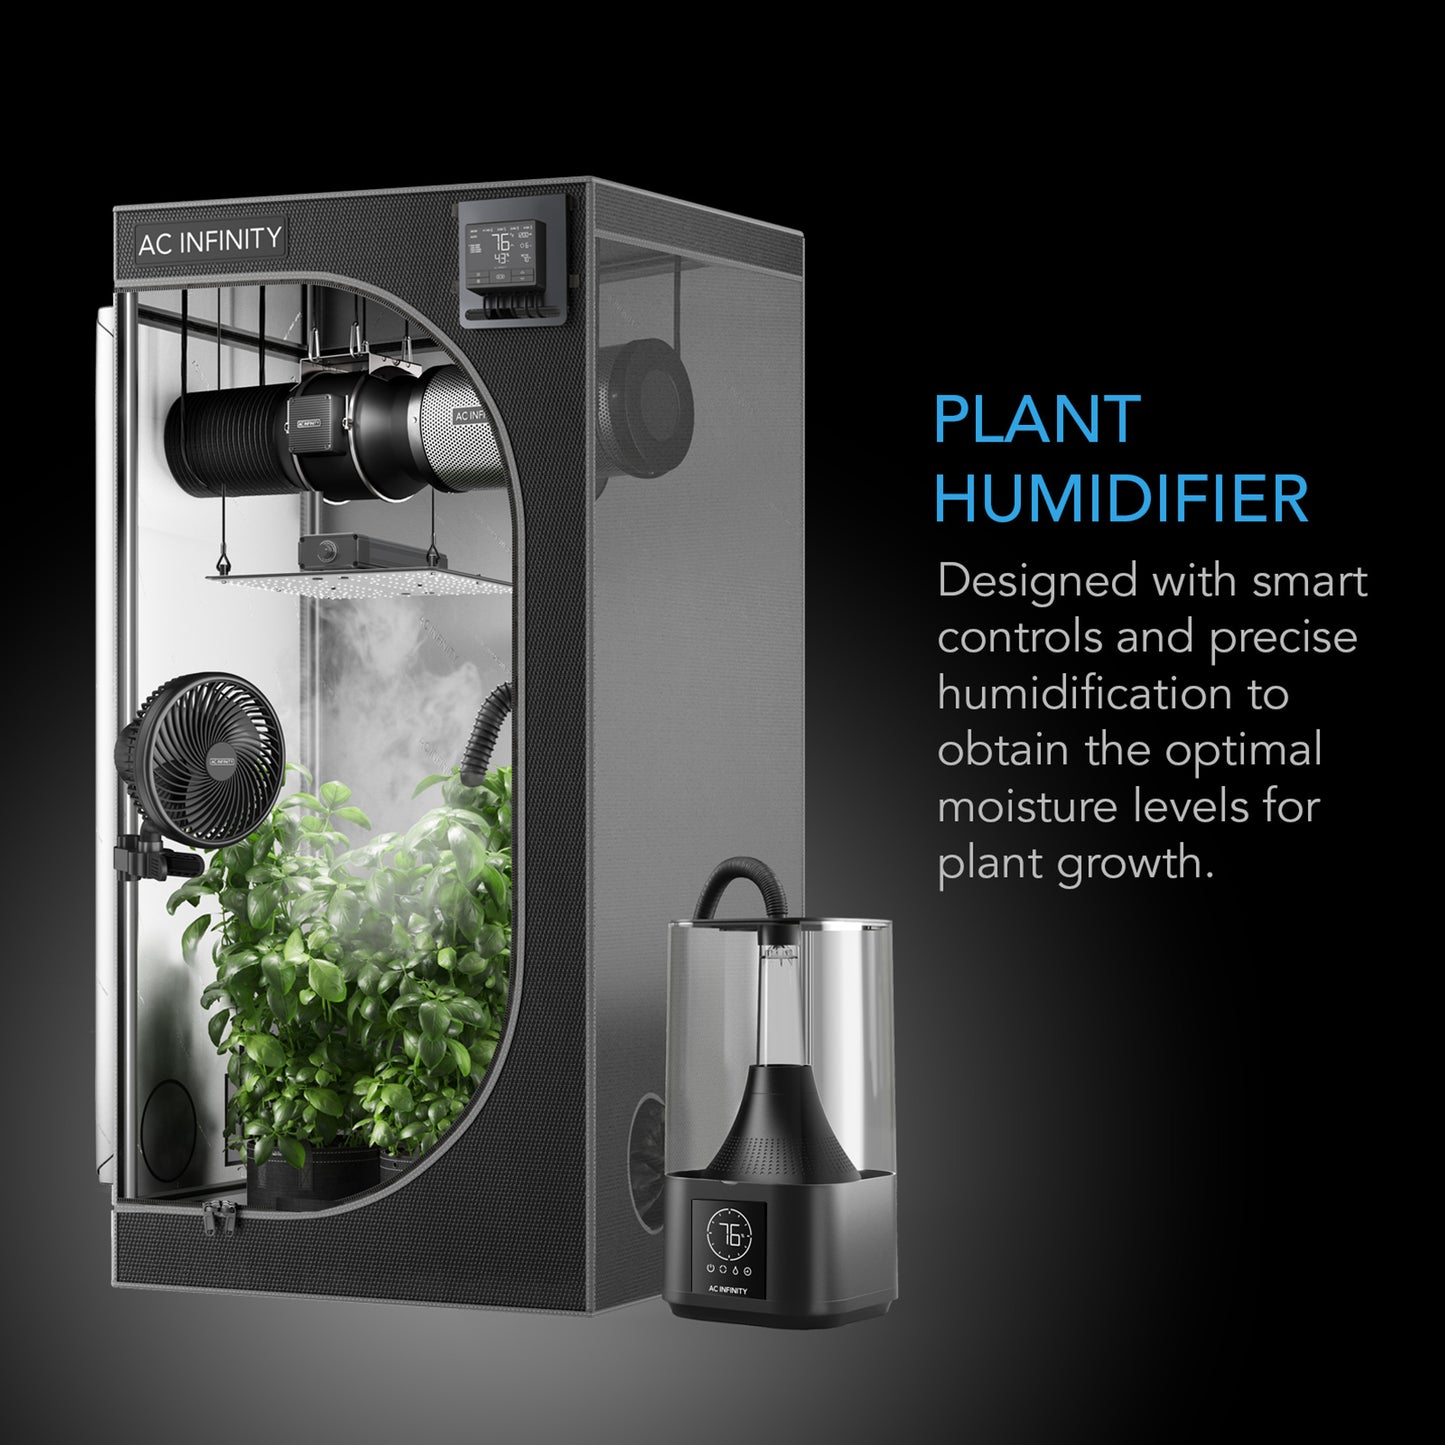 CLOUDFORGE T3, ENVIRONMENTAL PLANT HUMIDIFIER, 4.5L, SMART CONTROLS, TARGETED VAPORIZING